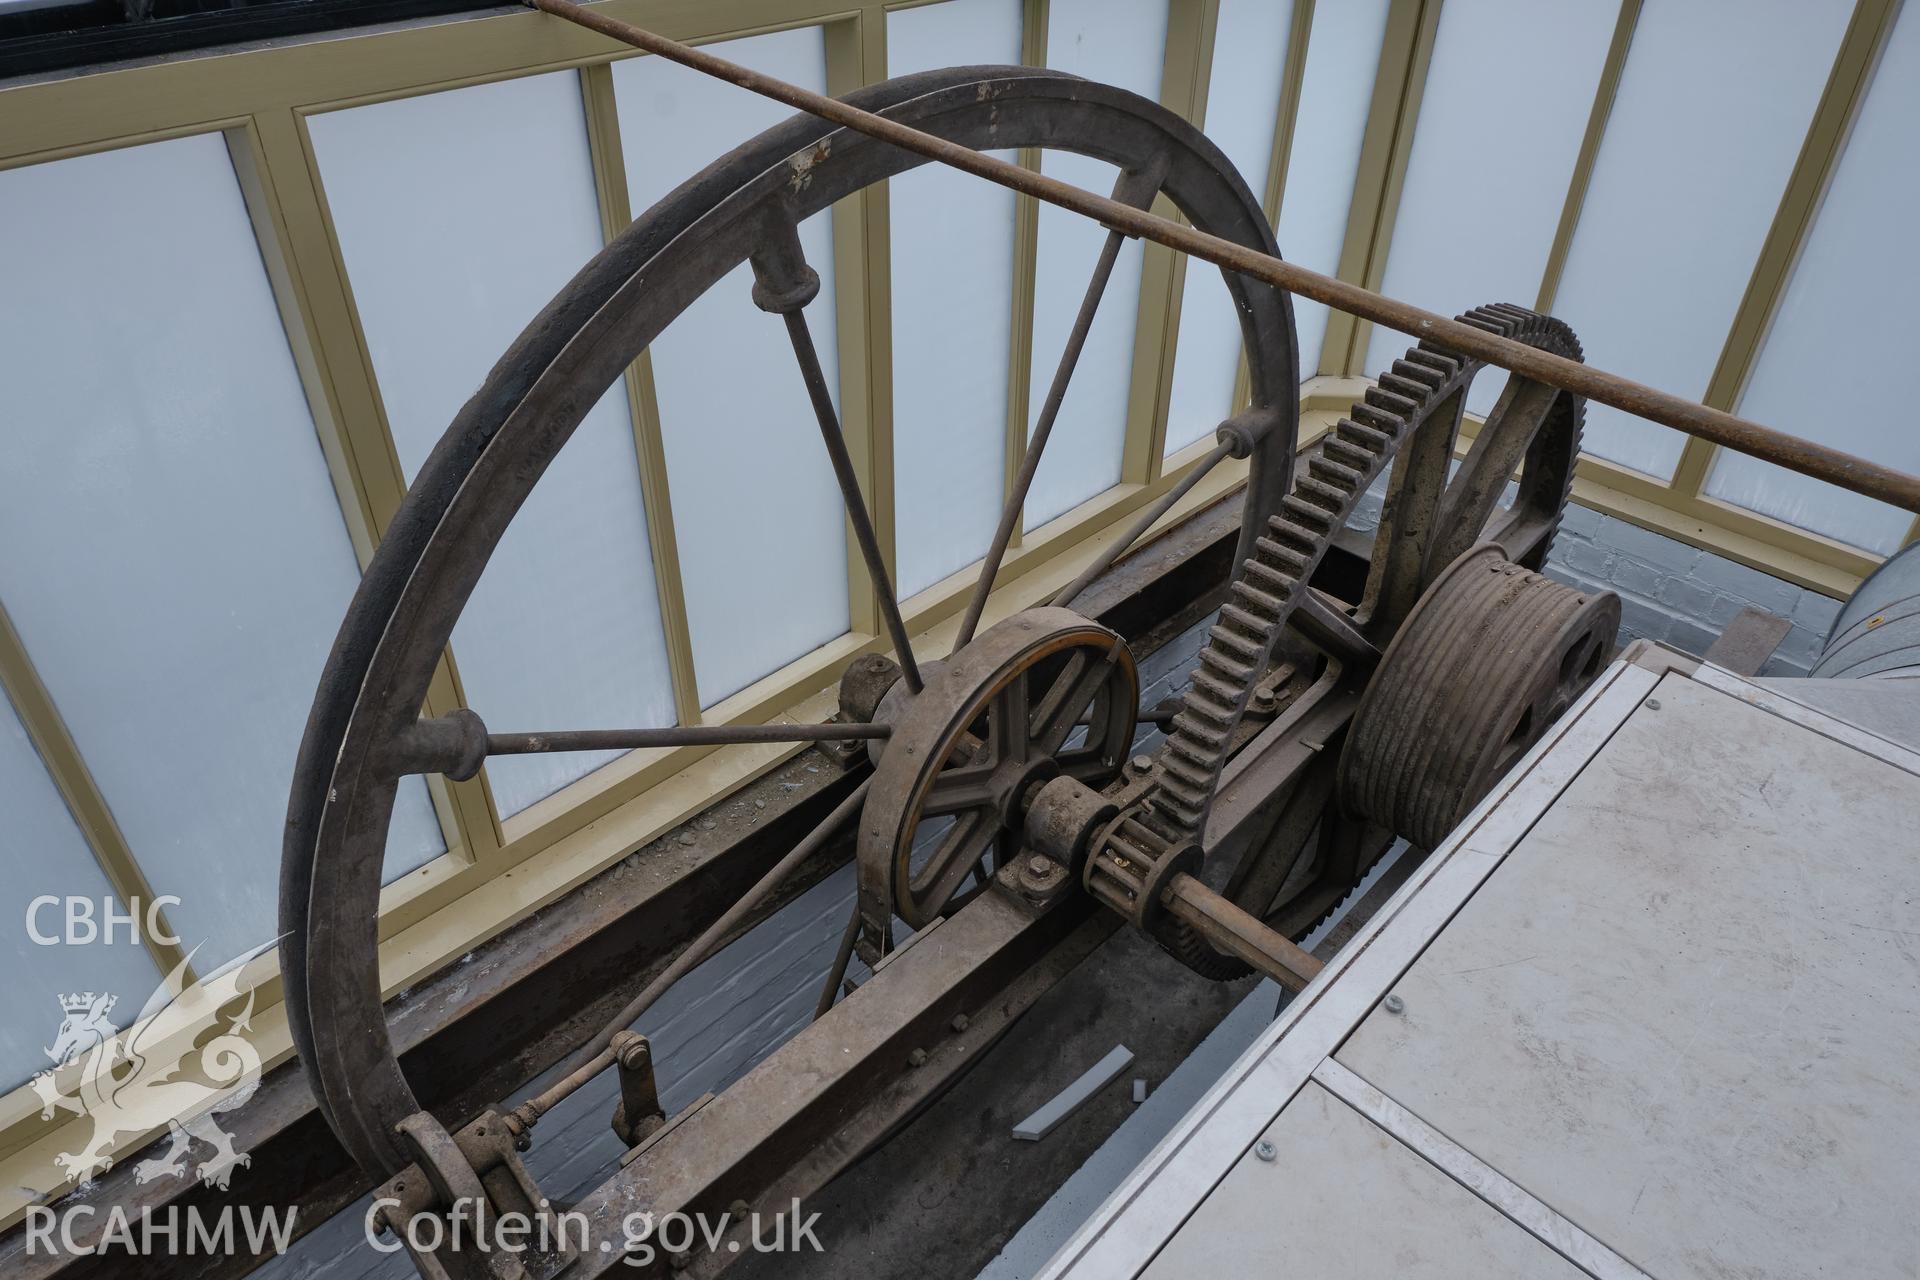 Colour photograph showing Automobile Palace - room 2.1, hoist flywheel and gears, looking W. Produced as part of Historic Building Recording for Automobile Palace, carried out by Richard Hayman, June 2021.